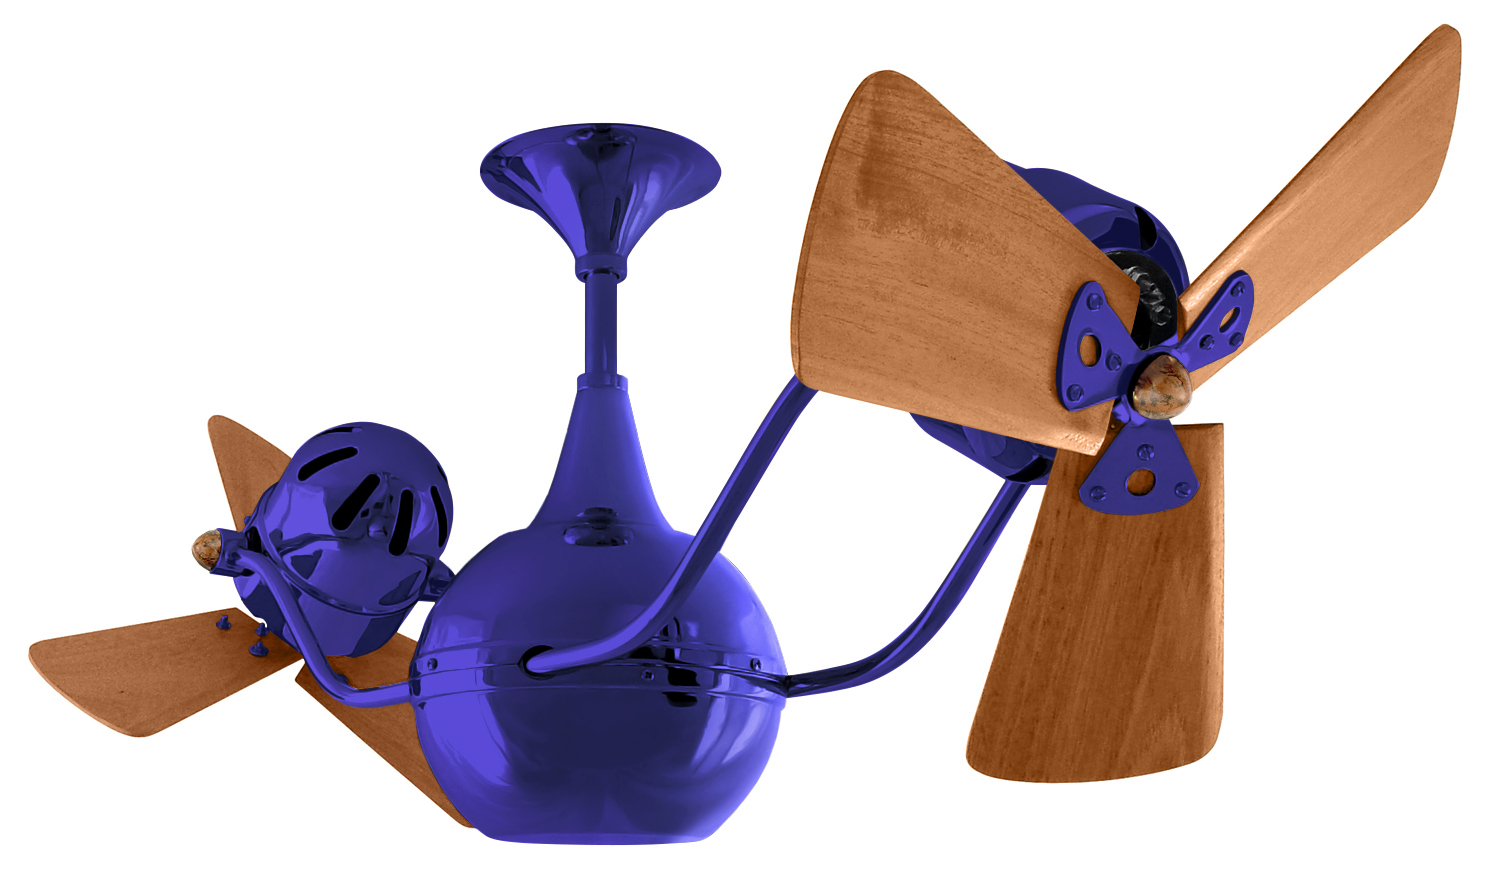 Vent-Bettina rotational dual head ceiling fan in Blue / Safira finish with Mahogany wood blades made by Matthews Fan Company.